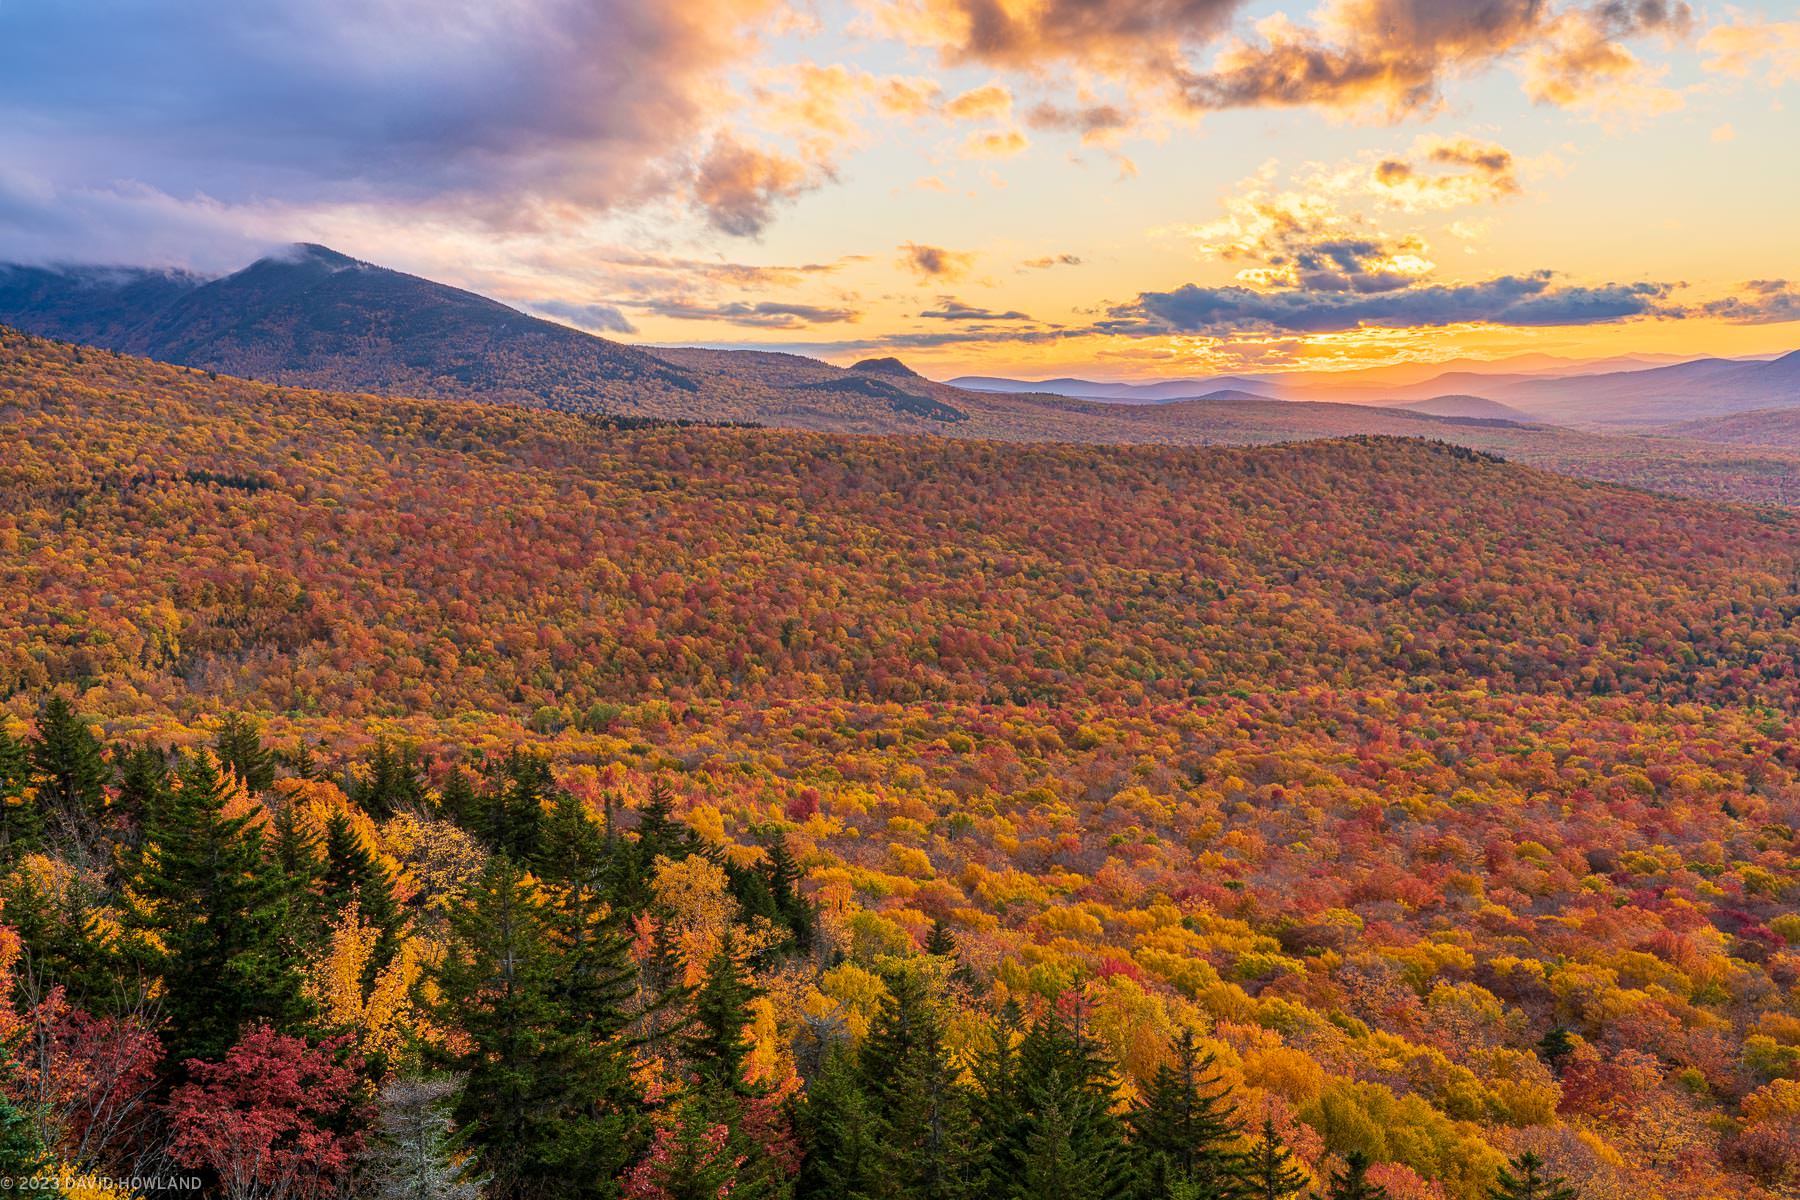 A photo of a colorful orange sunset behind a forest full of fall foliage in the White Mountains of New Hampshire